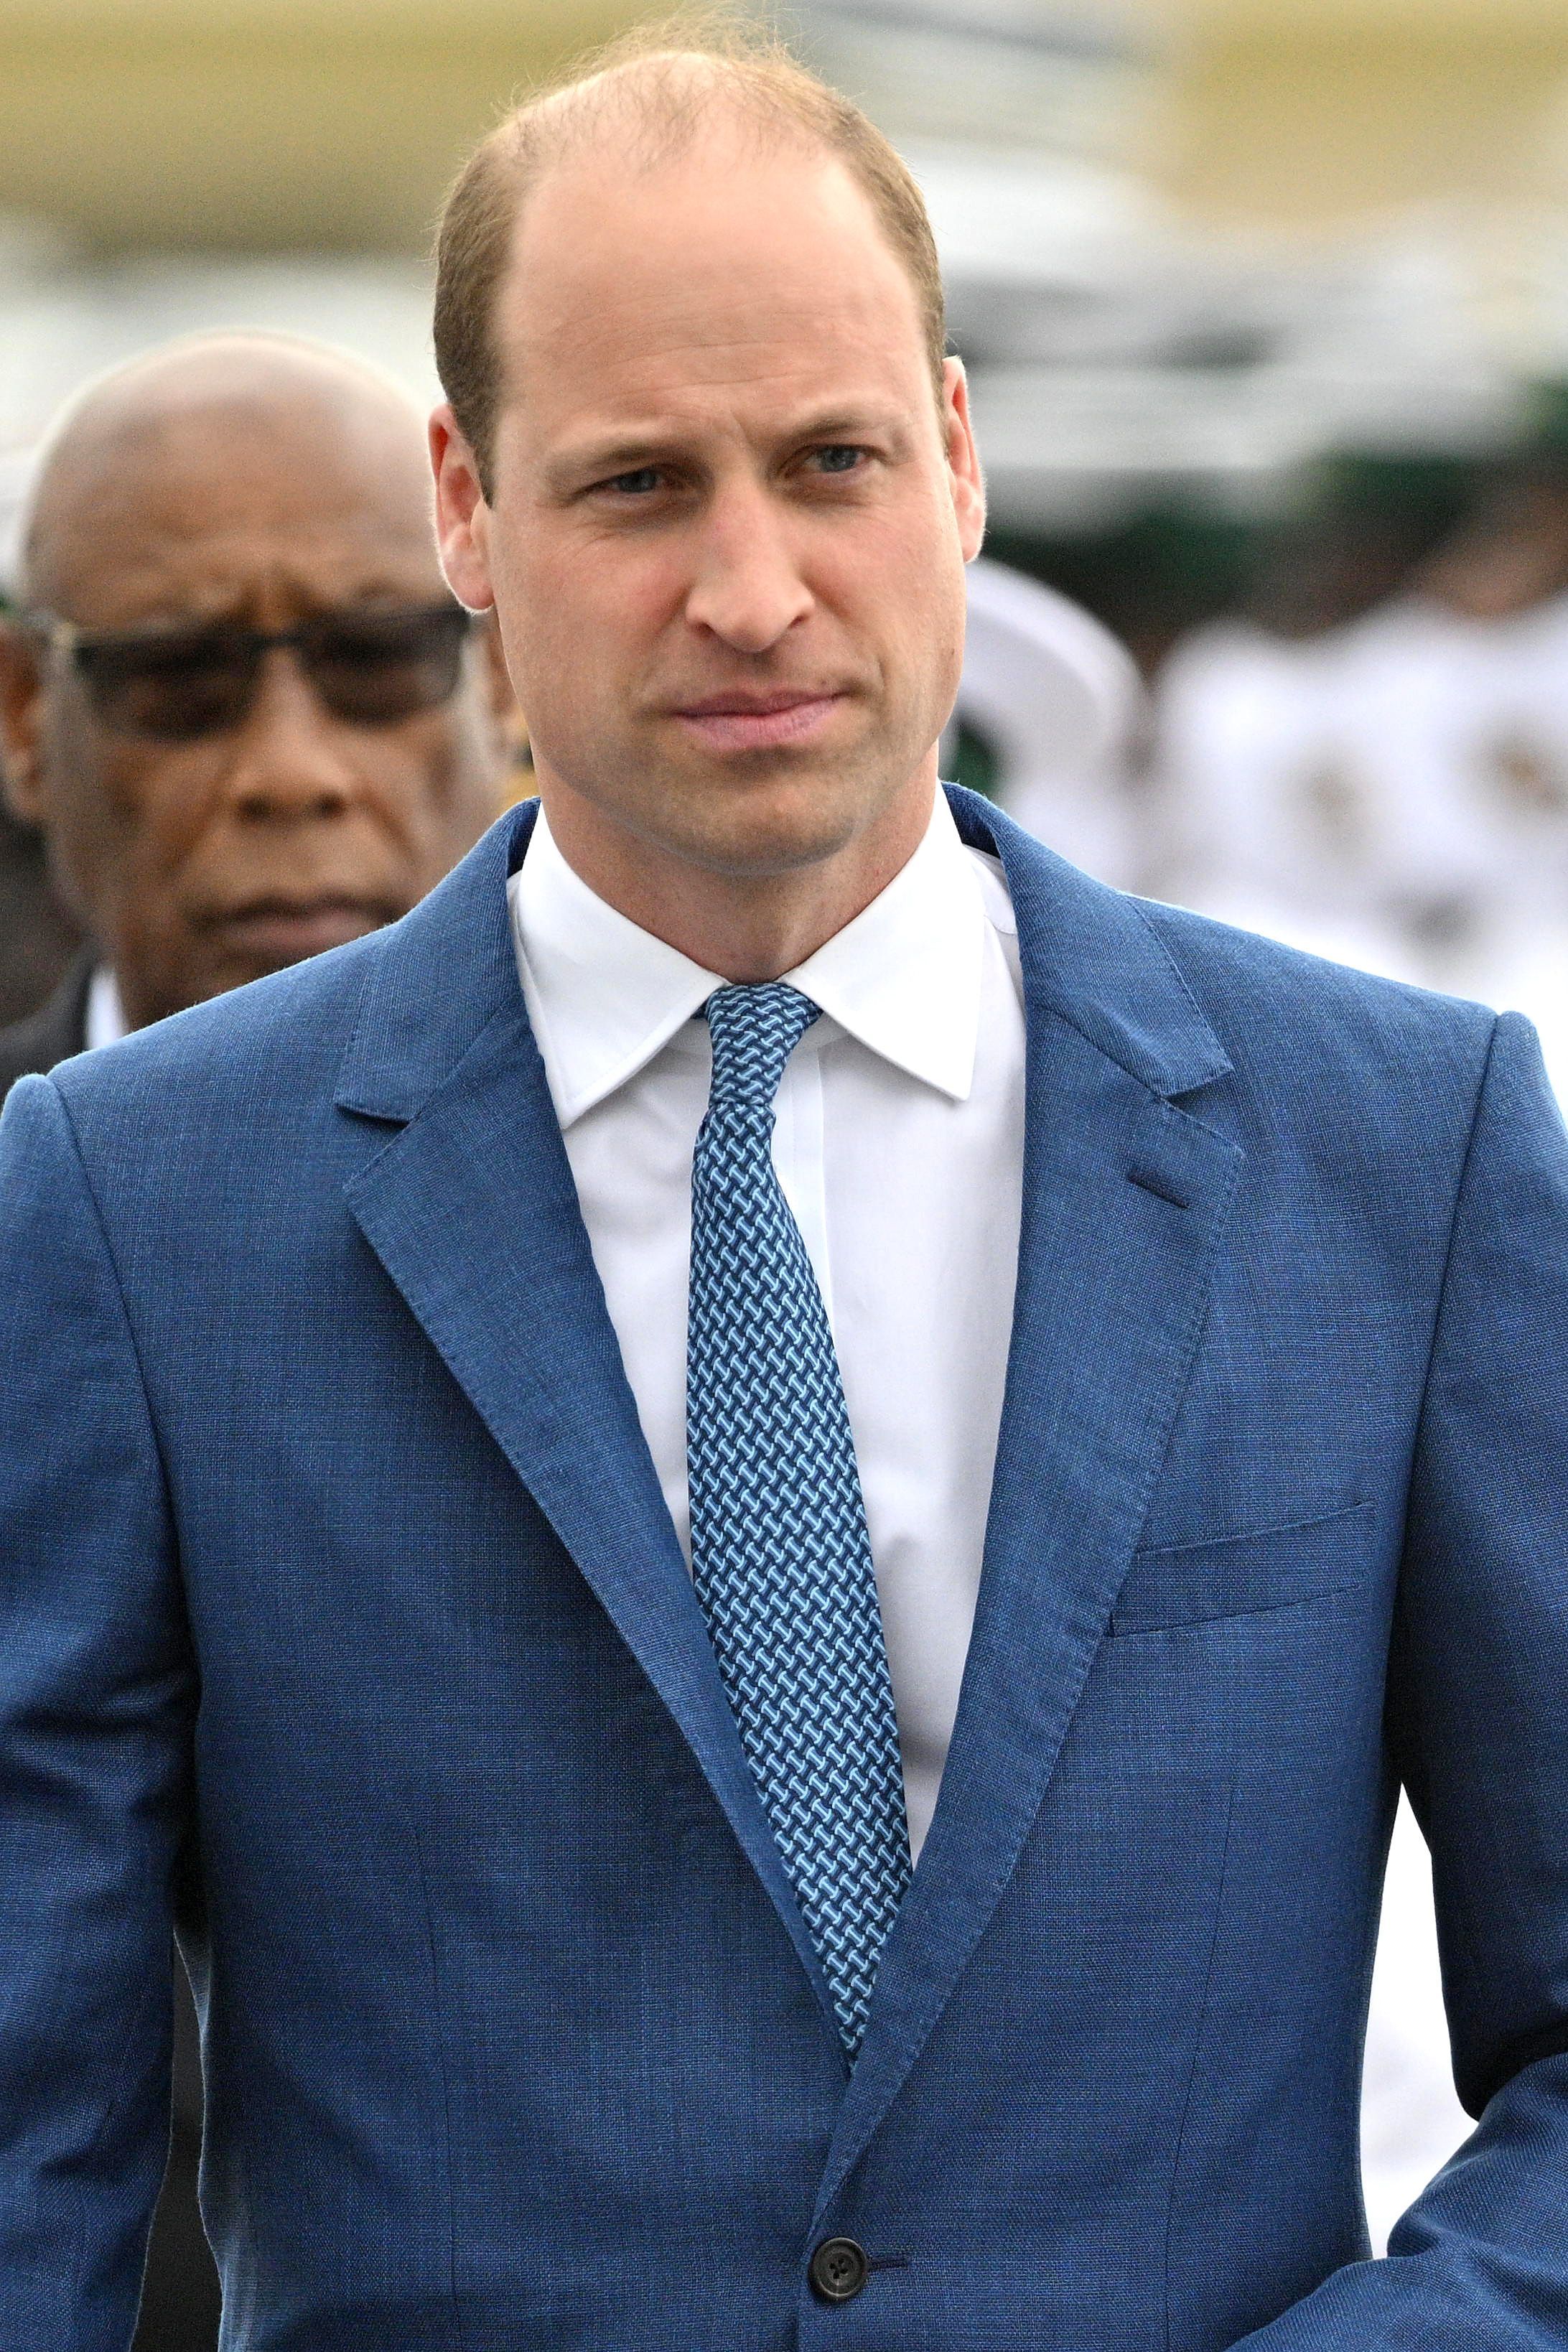 Prince William, Duke of Cambridge during the official arrival at Lynden Pindling International Airport on March 24, 2022 in Nassau, Bahamas | Source: Getty Images